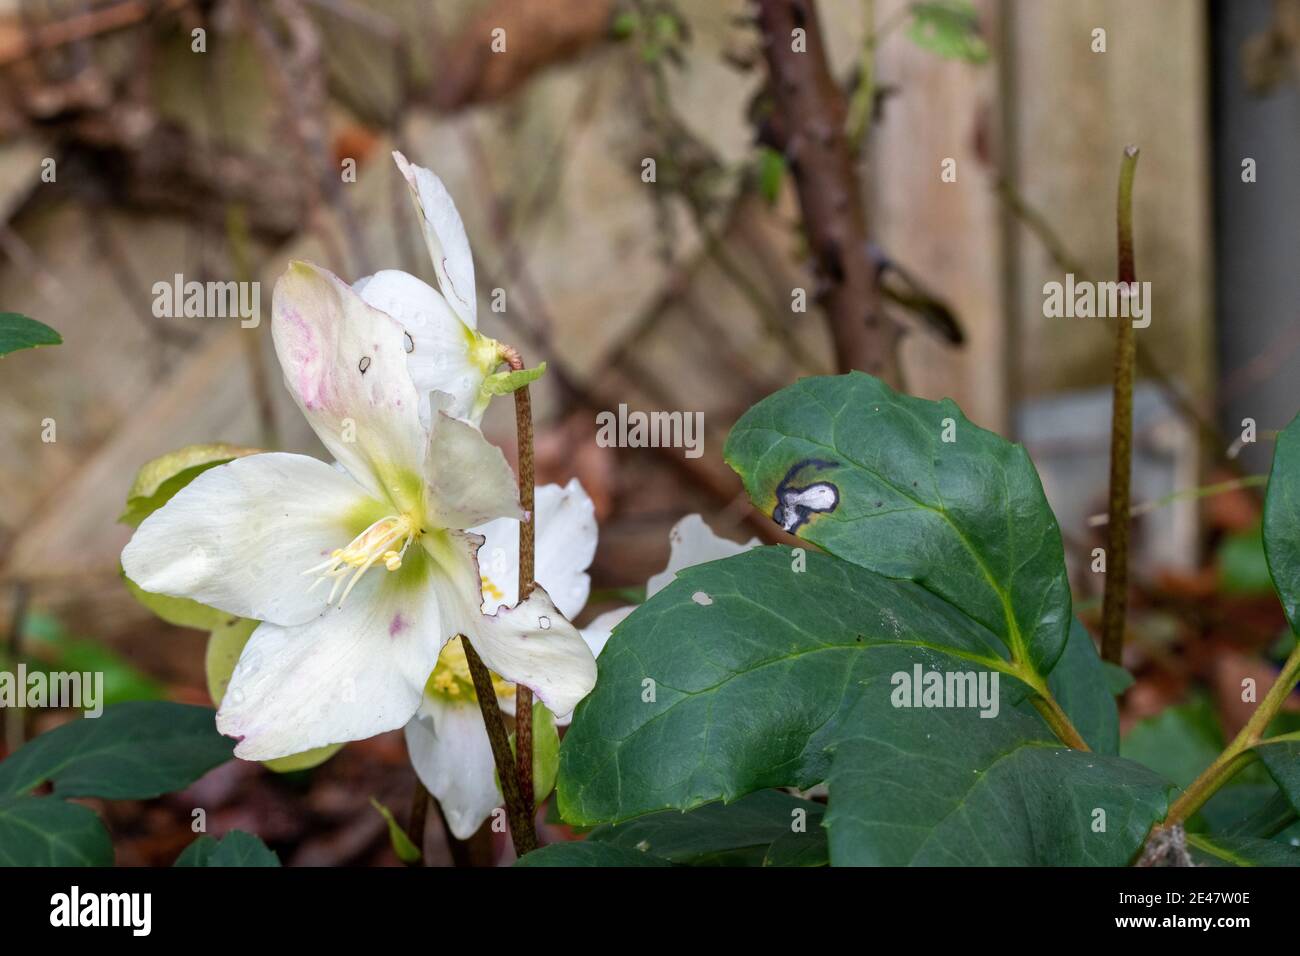 The Christmas rose, Helleborus niger is also called snow rose or hellebore and inspires in winter with its elegant white flowers. Stock Photo